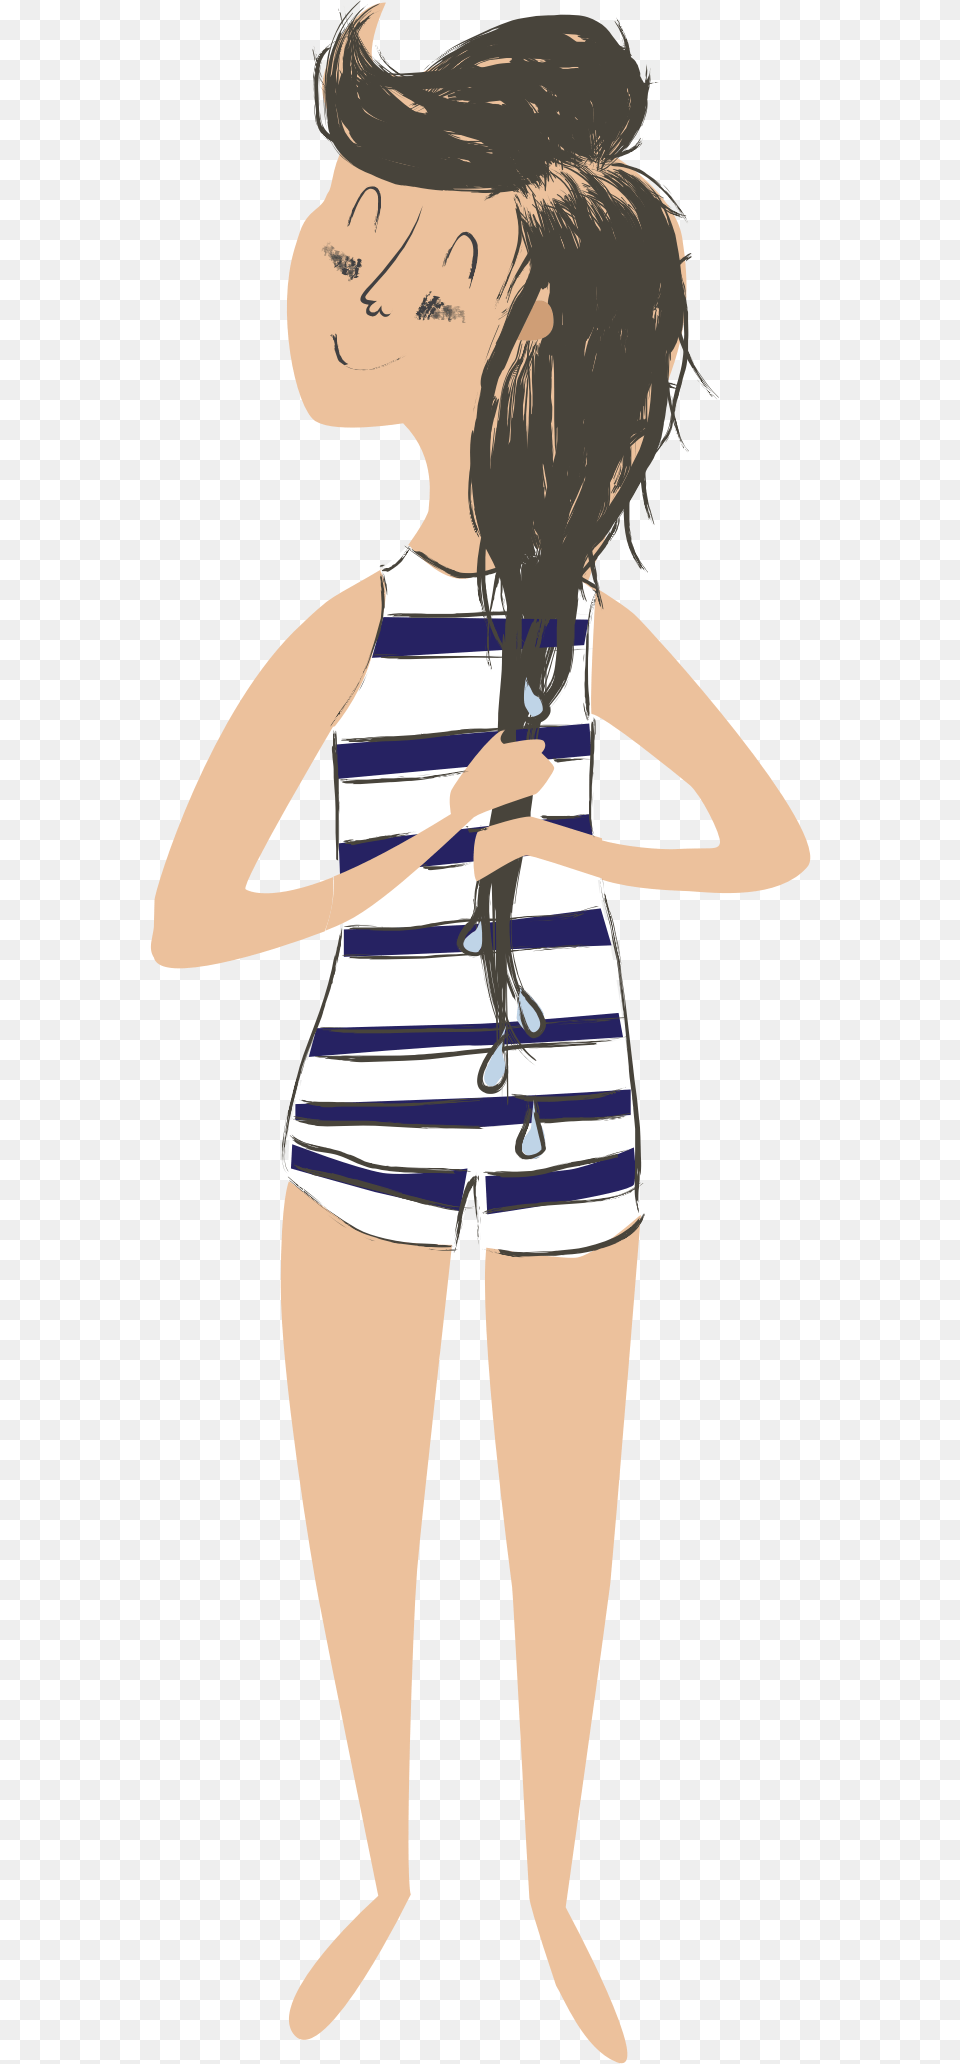 This Icons Design Of Girl In Bathing Suit Girl In Bathing Suit Clipart, Clothing, Person, Shorts, Swimwear Free Png